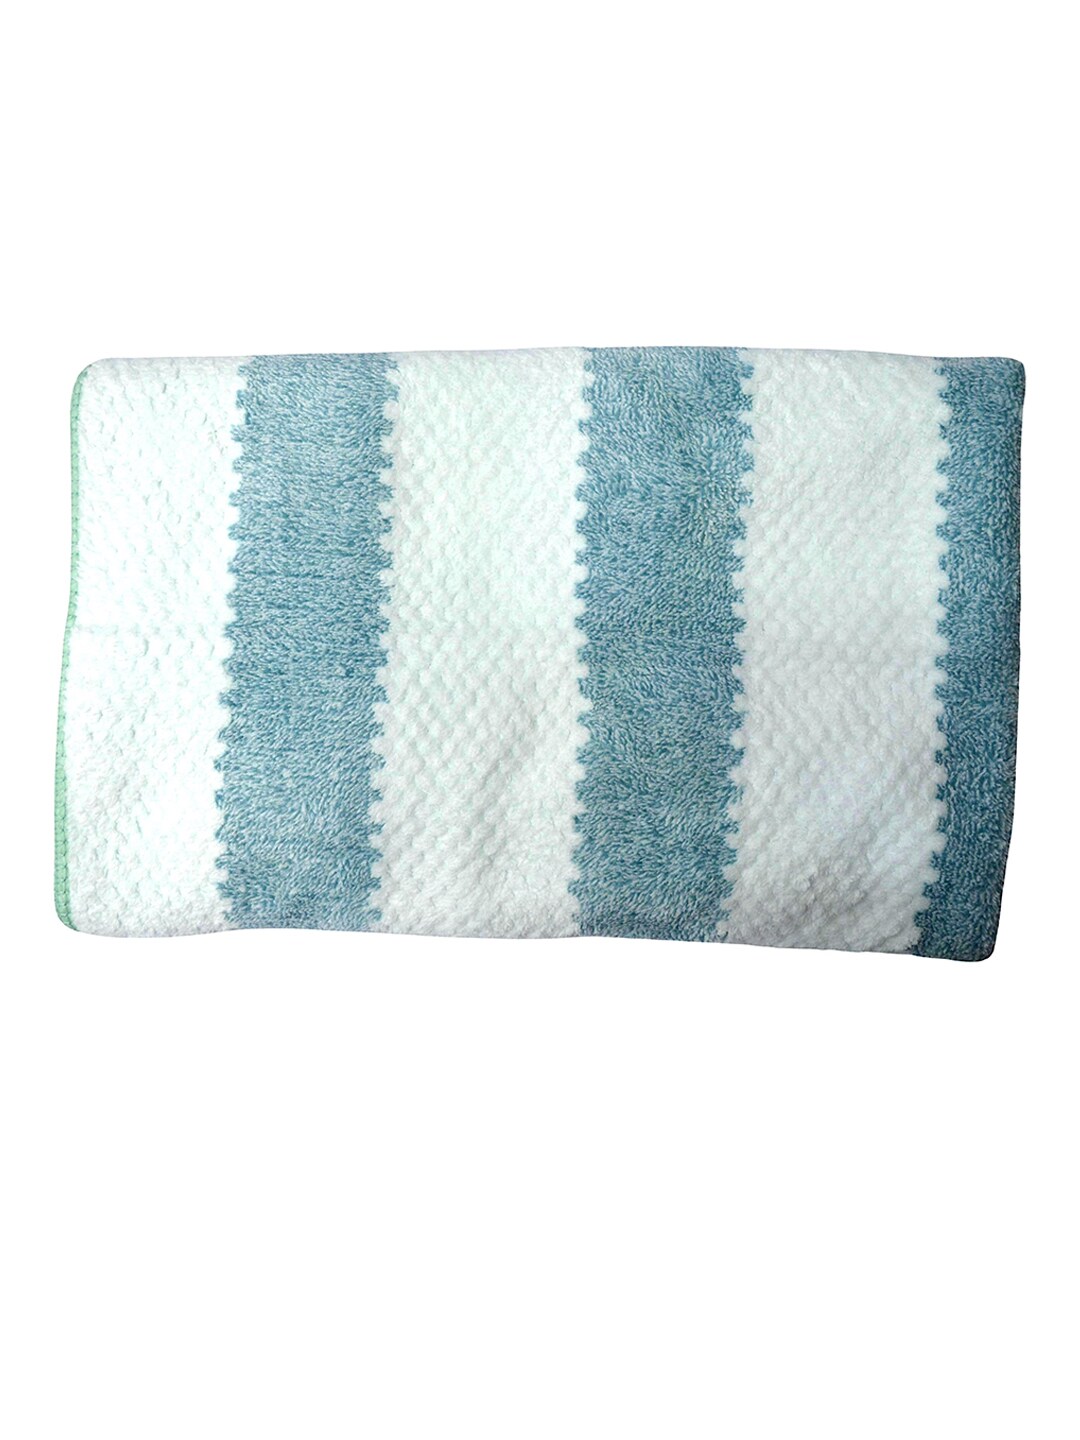 Tranquil square Unisex Green & White Striped 650 GSM Cotton Bath Towels Price in India